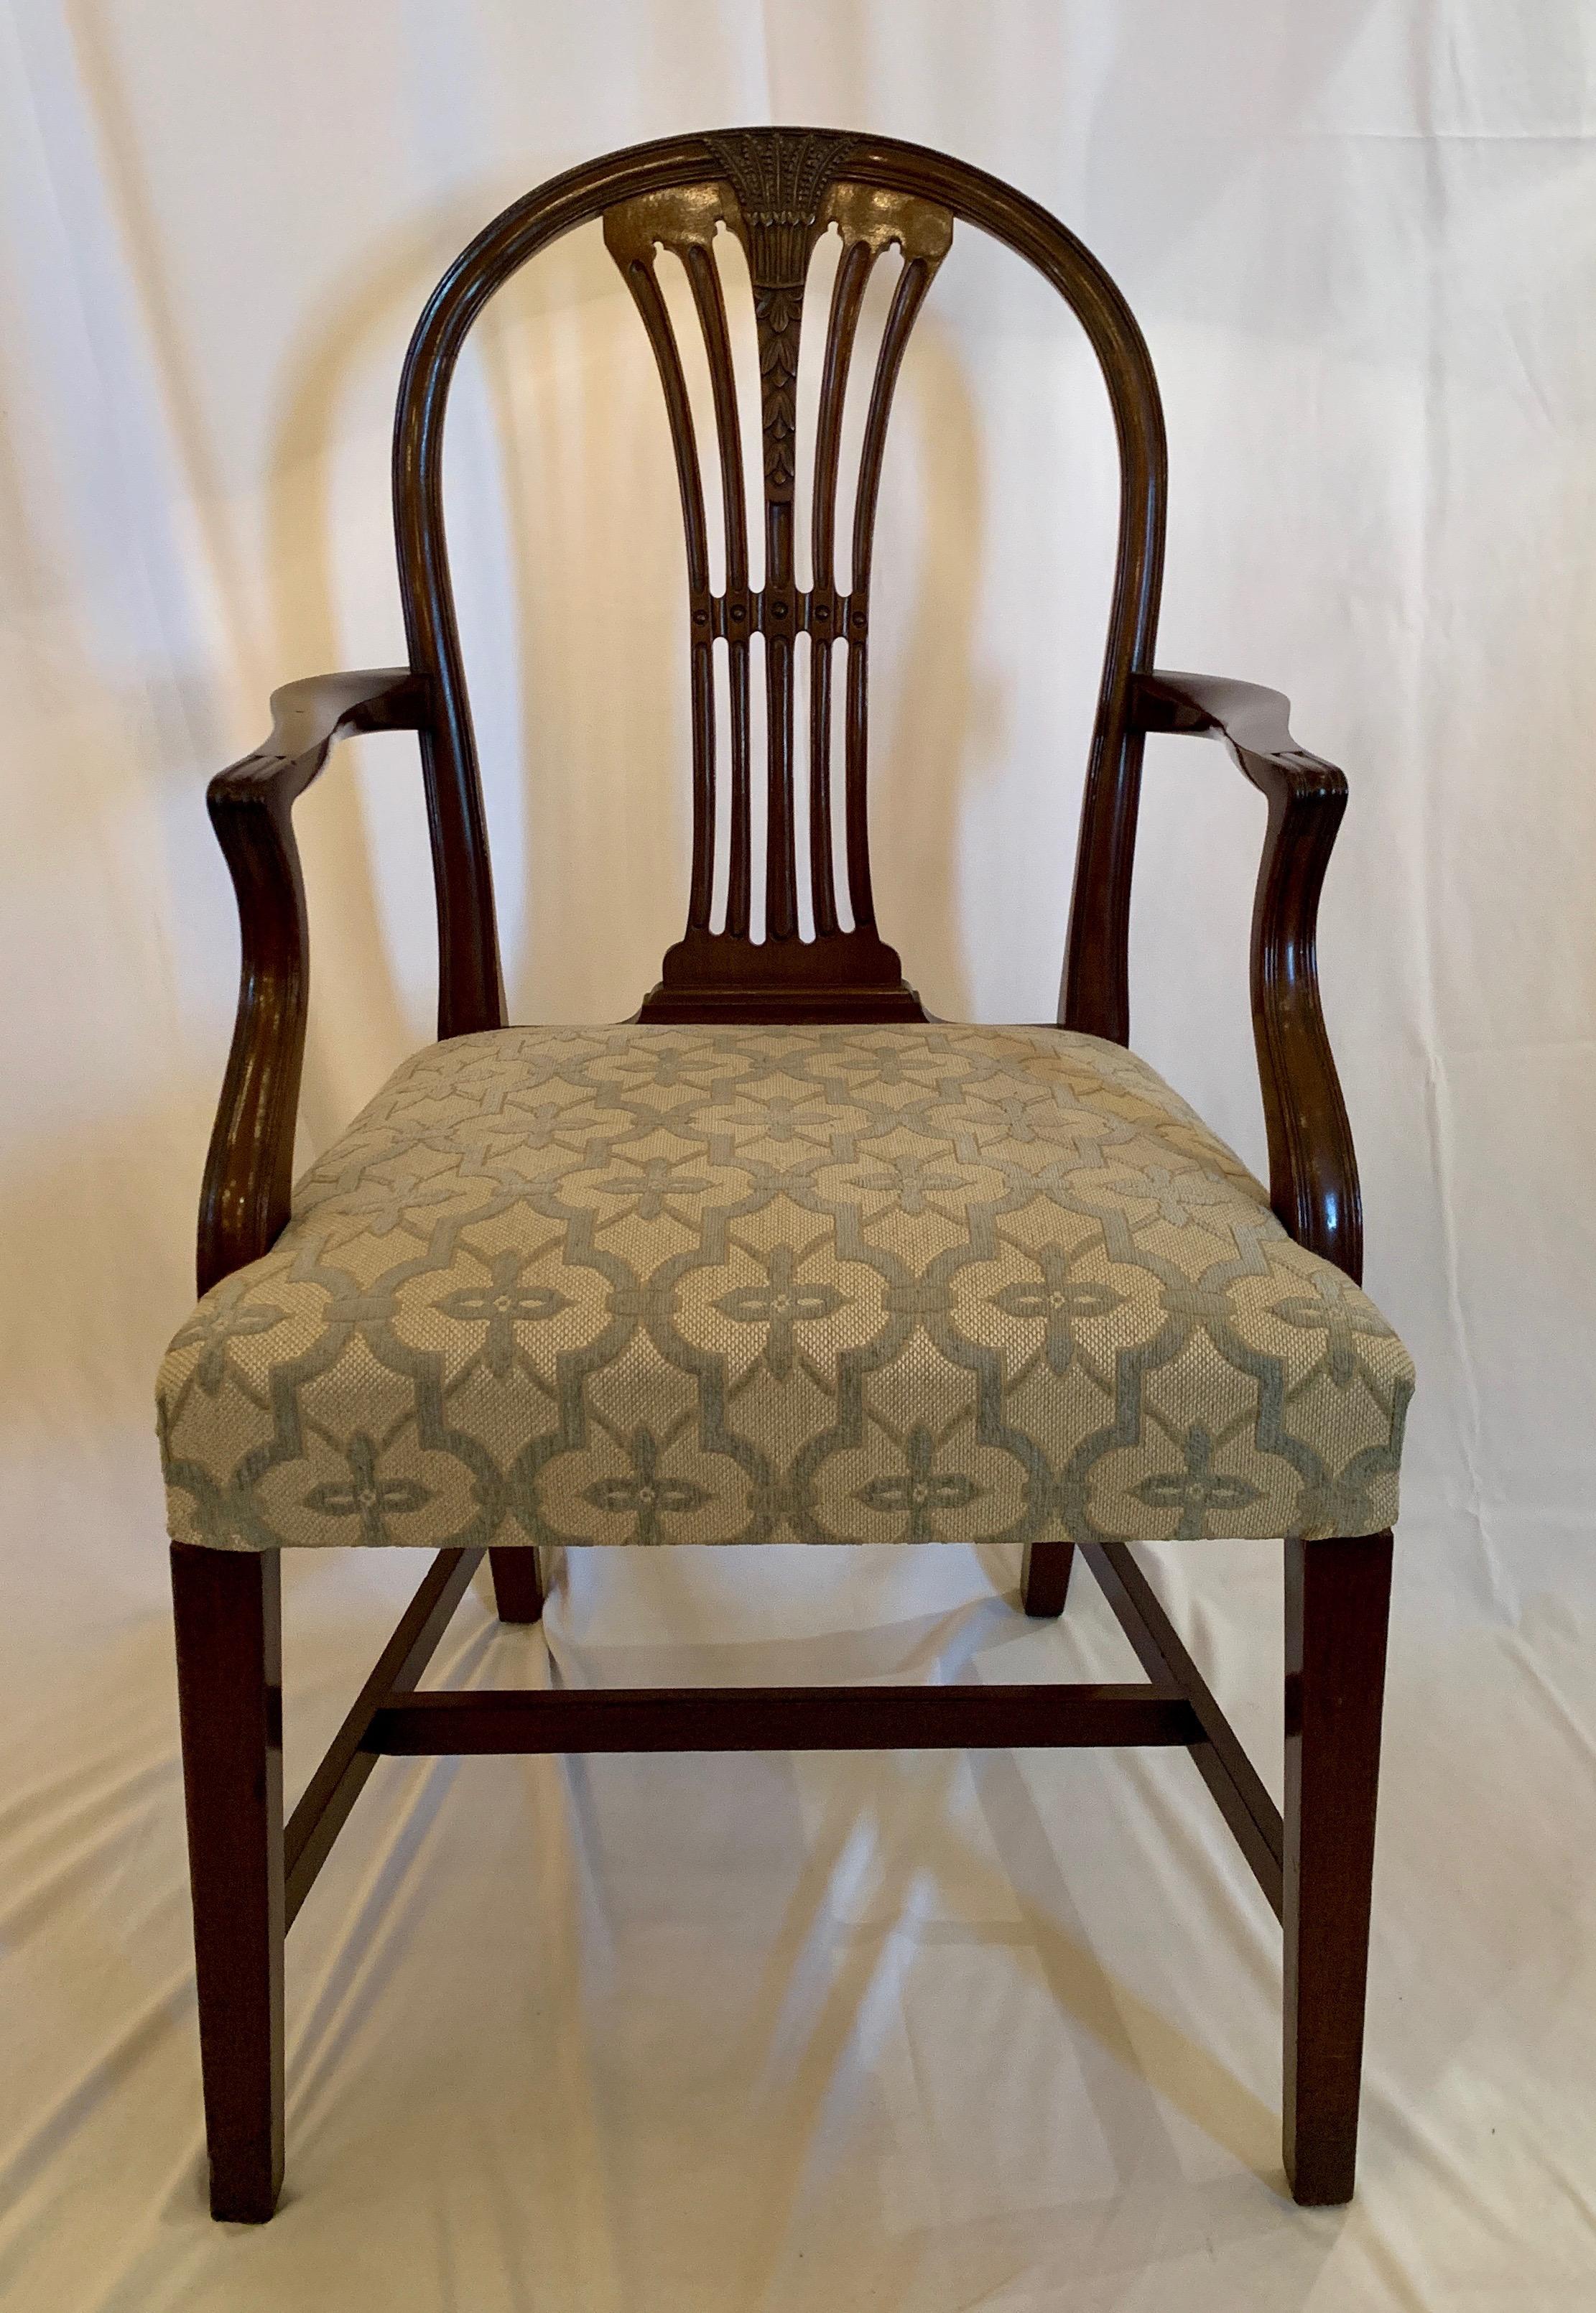  A lovely pair of armchairs with strong lines that would complement nearly any style of decor.